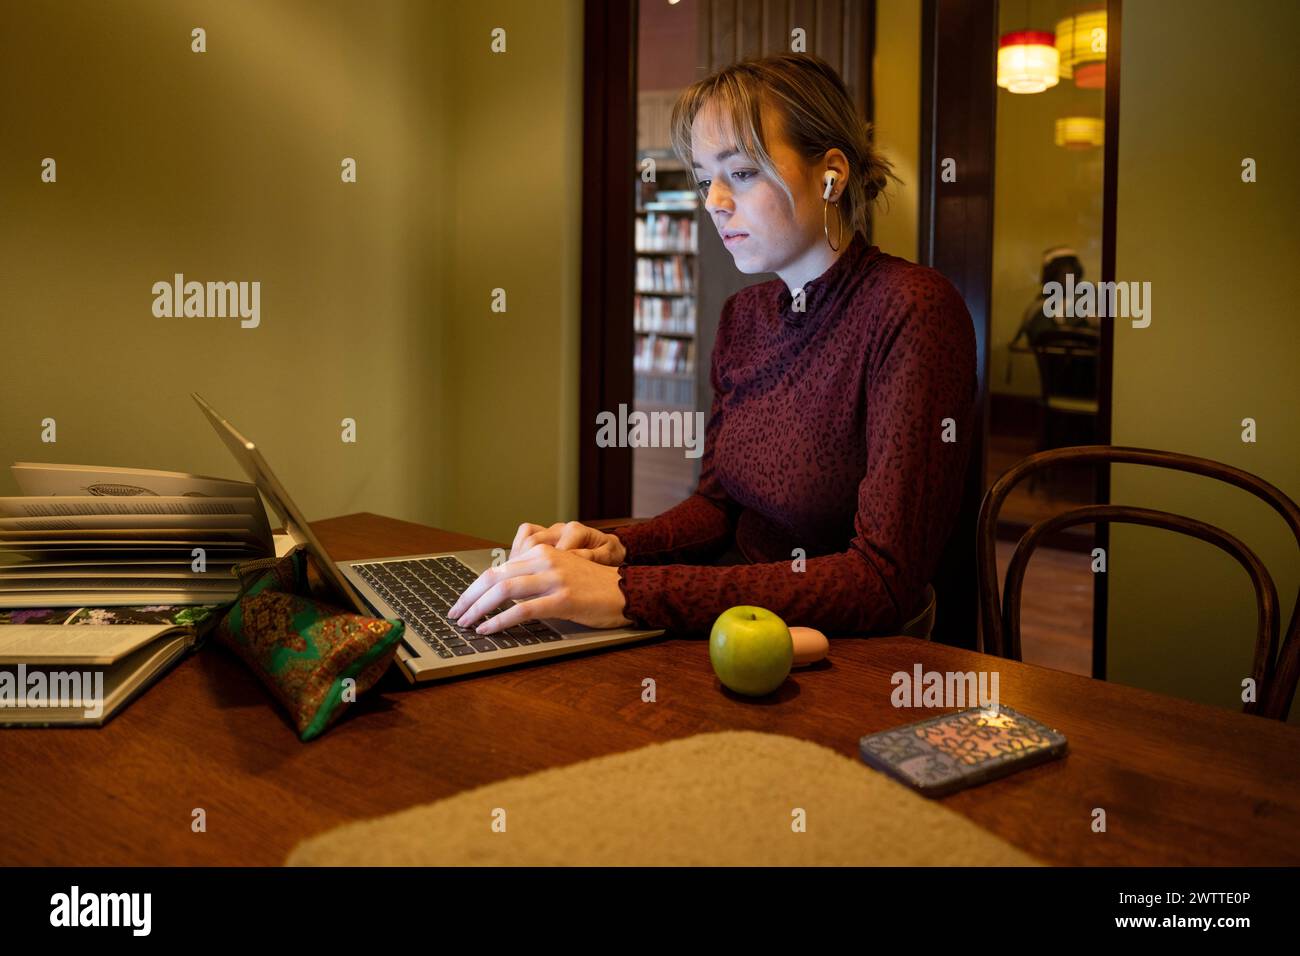 Young woman focused while working on laptop at a home study desk. Stock Photo